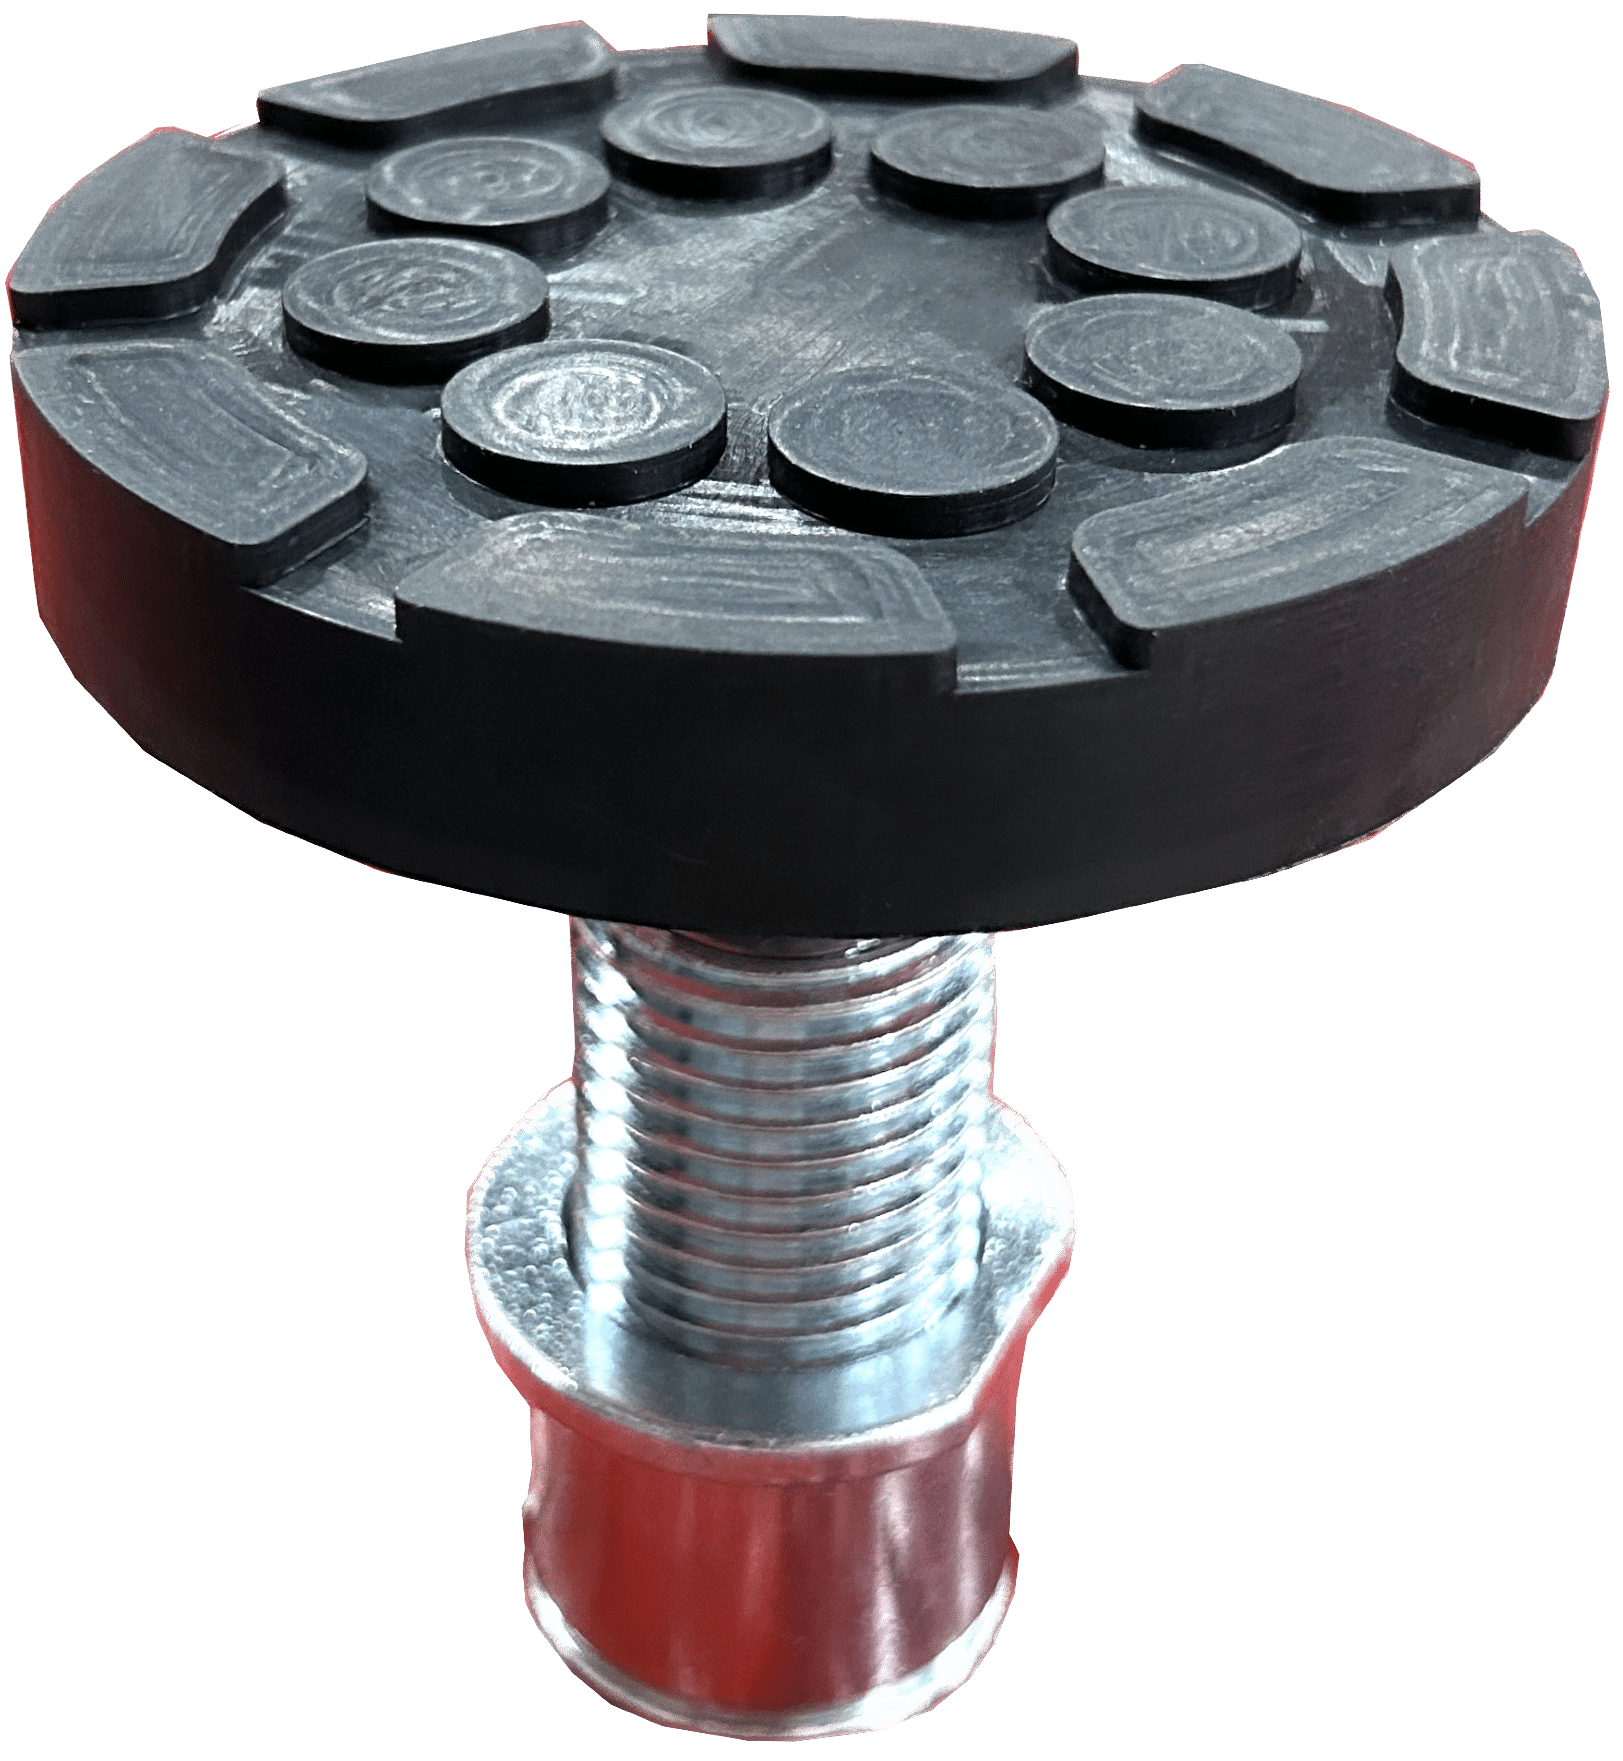 A screw in adapter with a black rubber pad meant for electric vehicles serviced on 2 post lifts